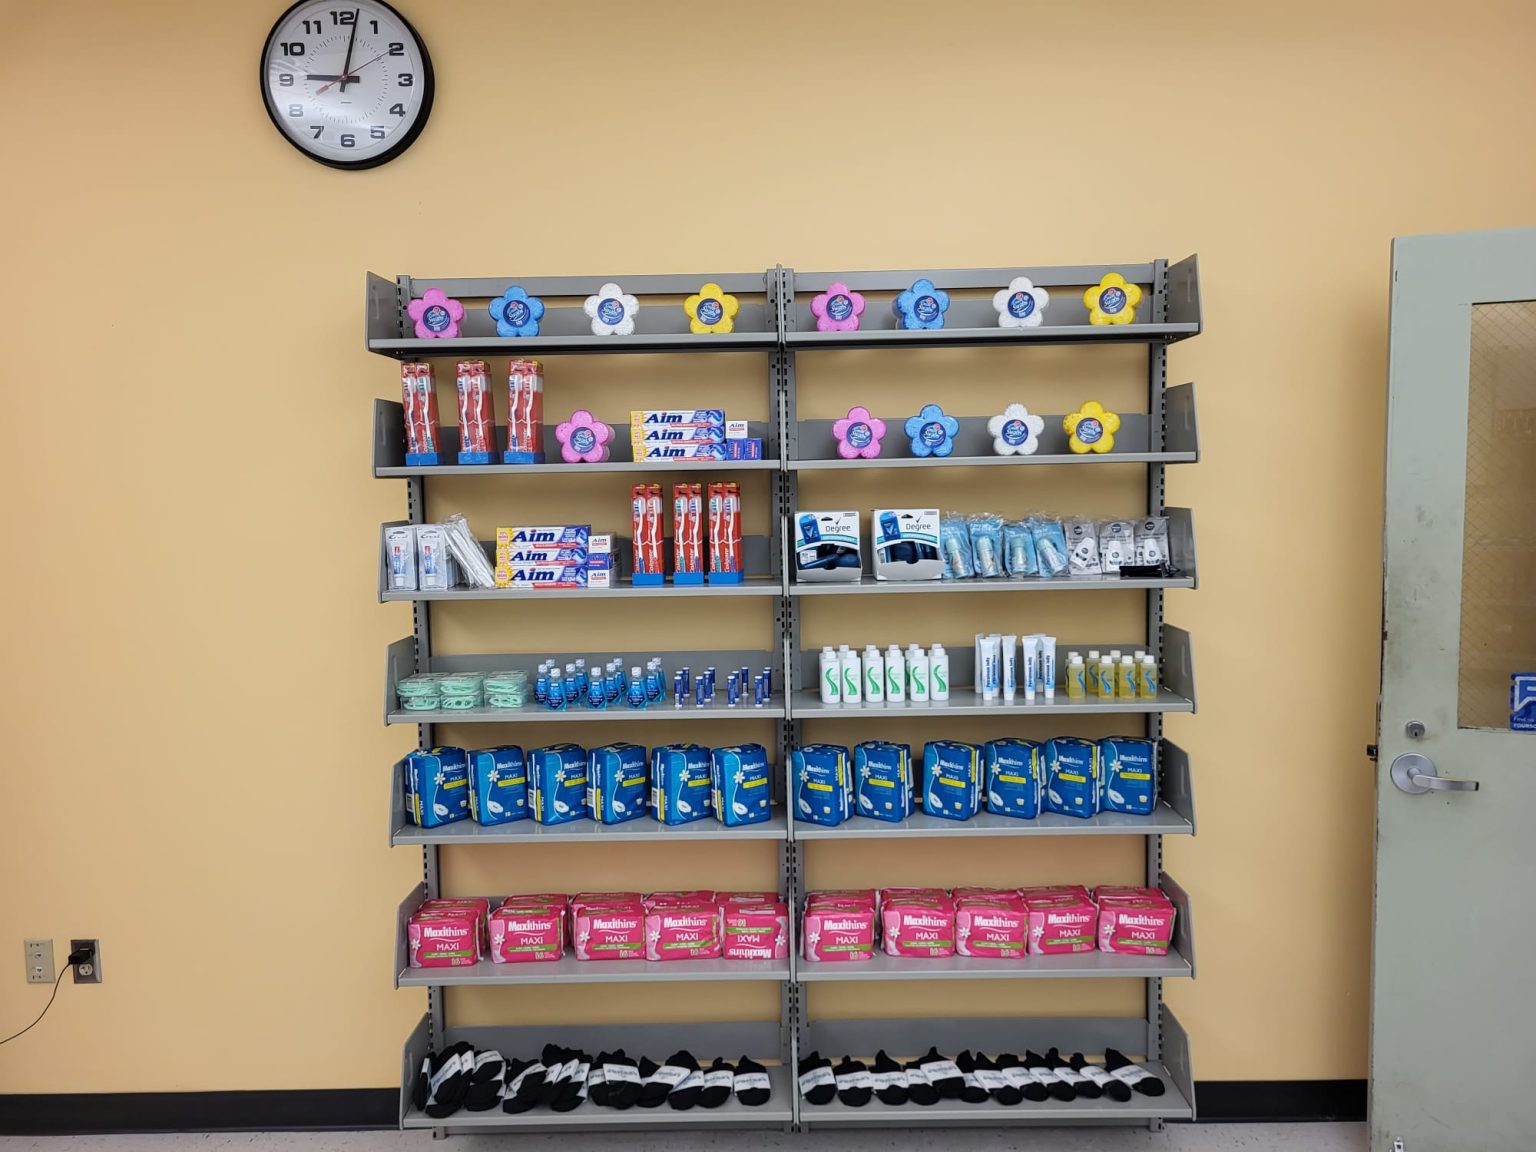 Along with the new pantry having additional space, toiletries have been added to what was previously available to students.